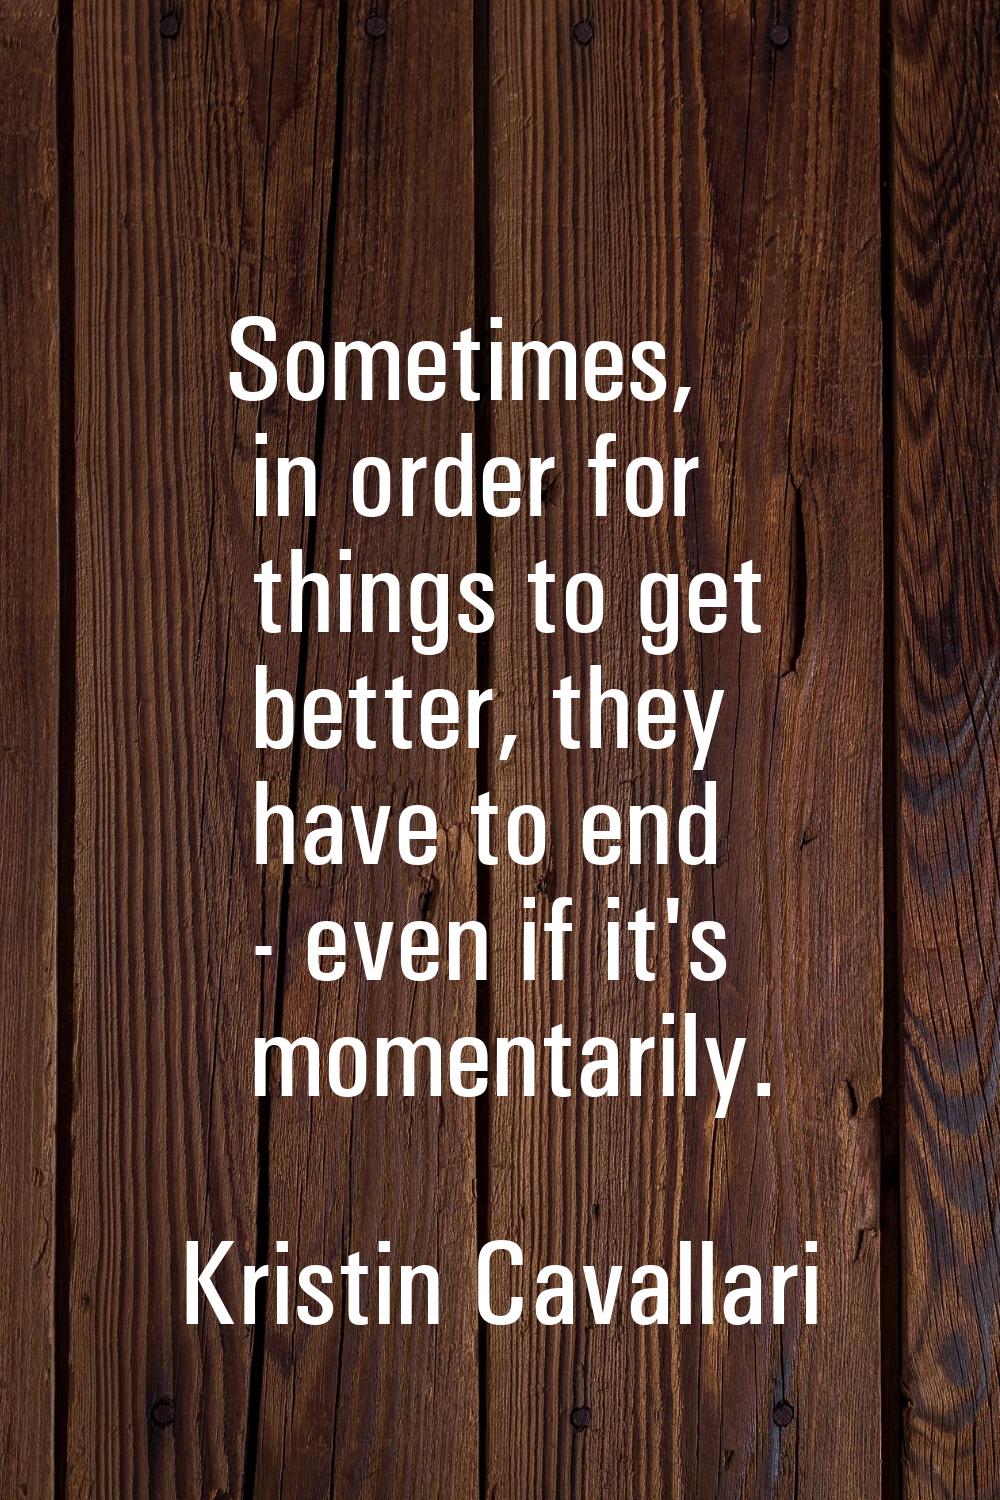 Sometimes, in order for things to get better, they have to end - even if it's momentarily.